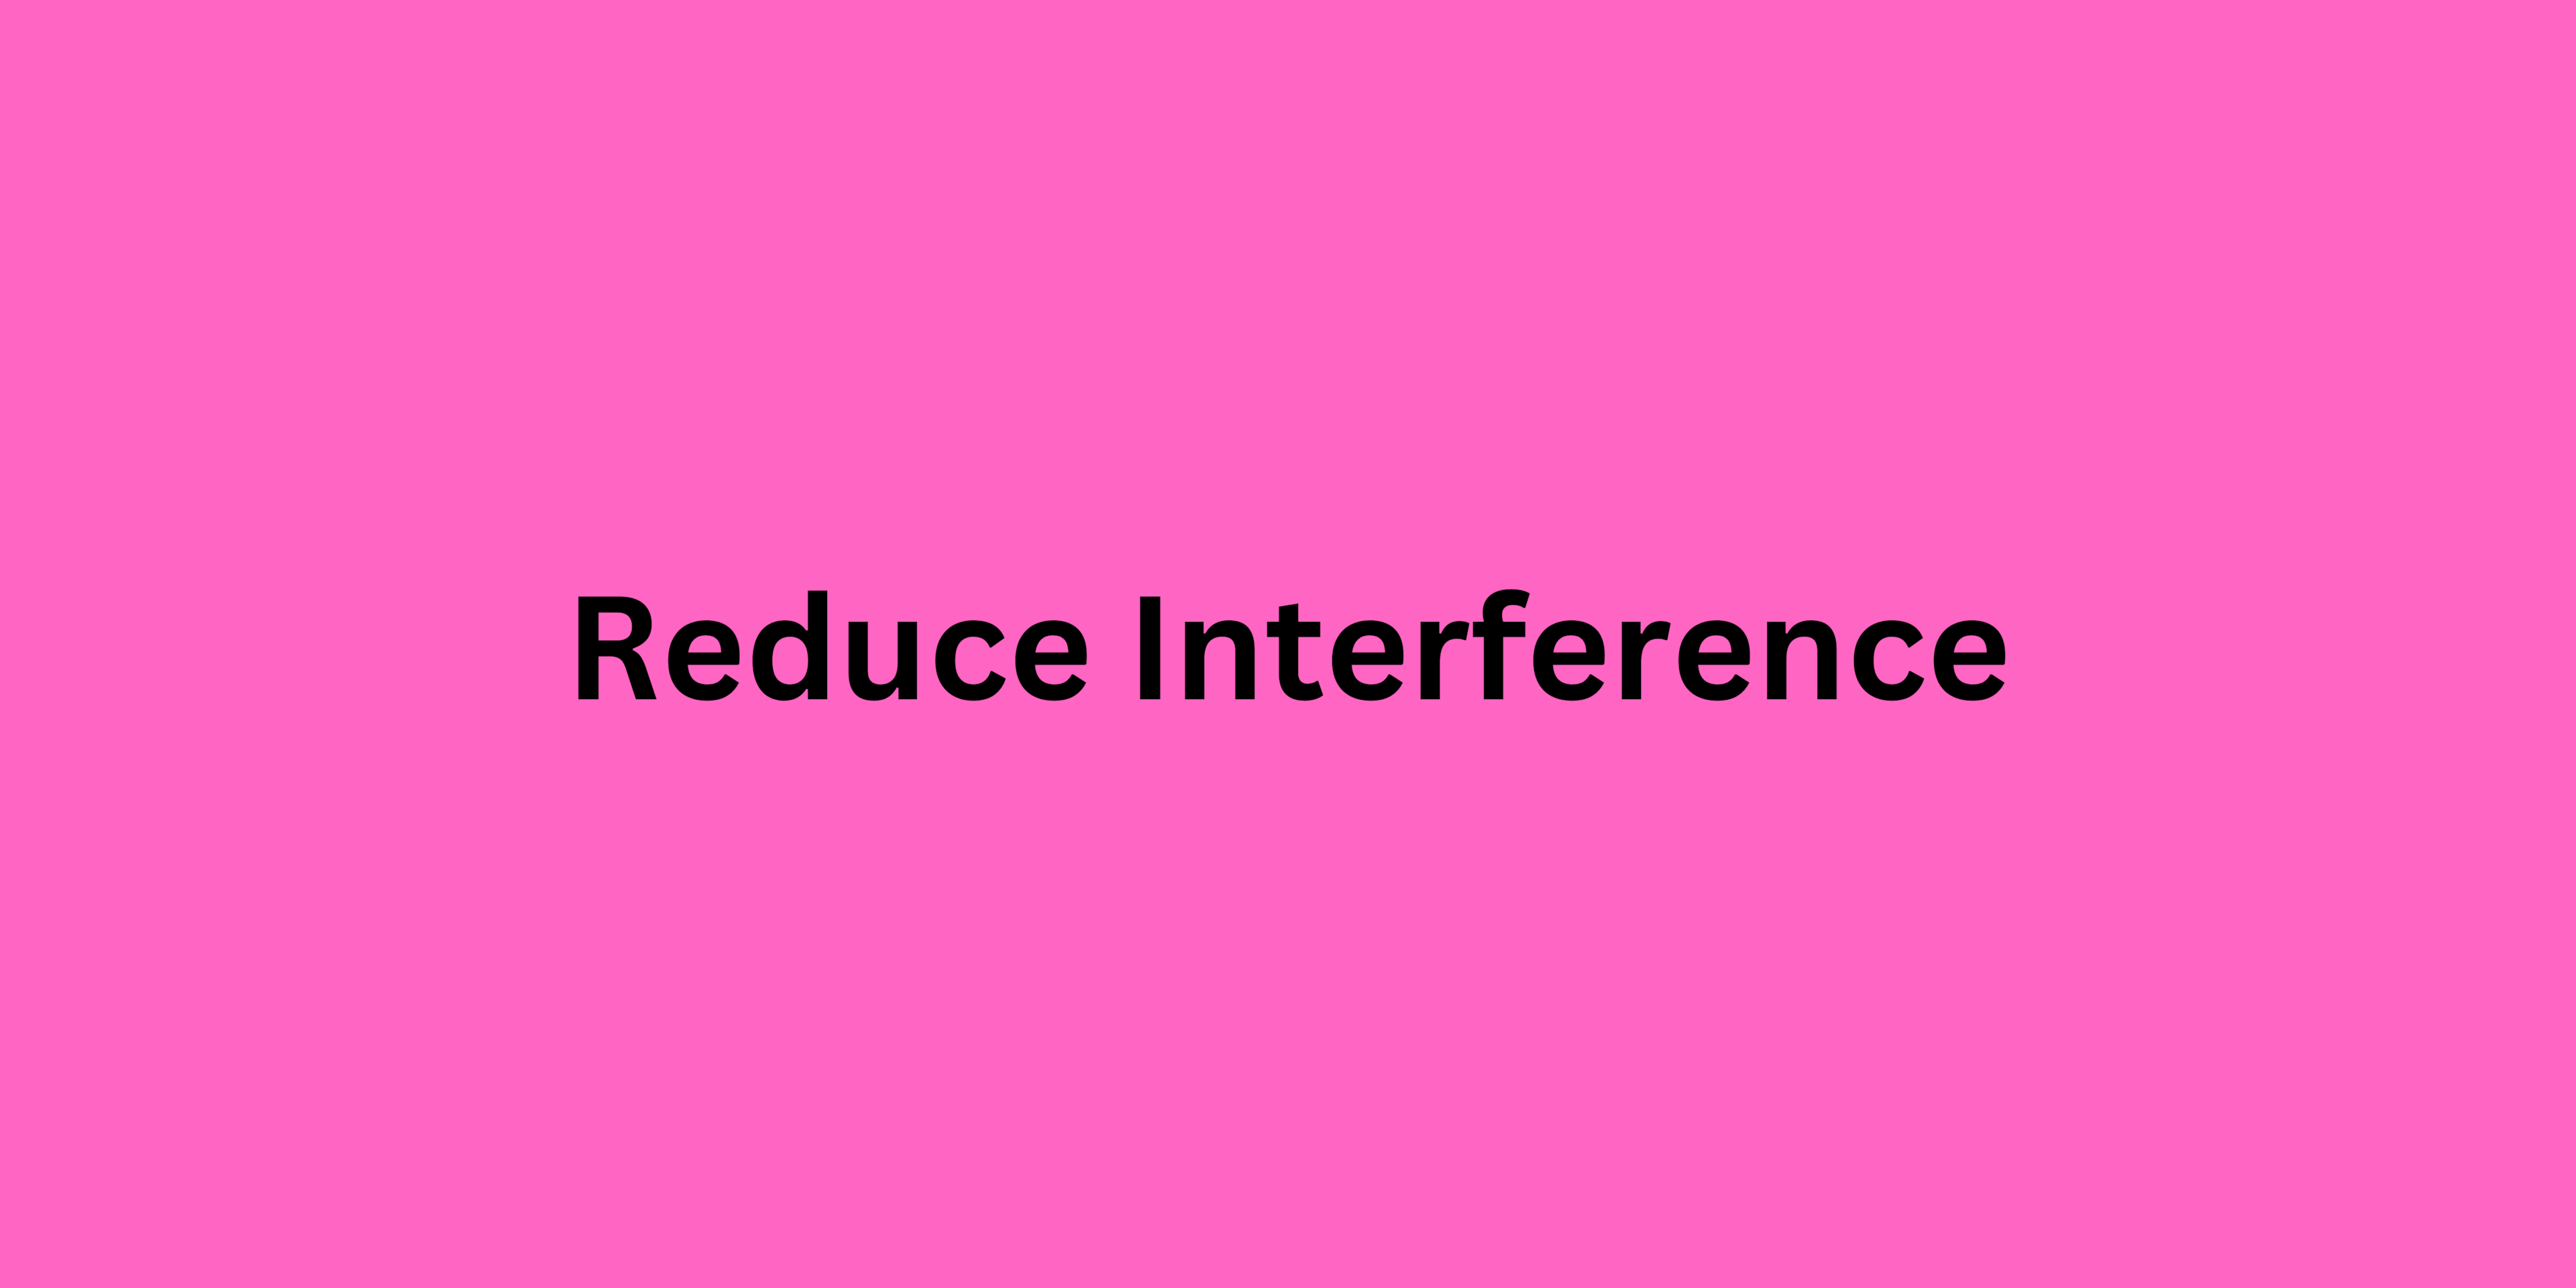 Reduce Interference